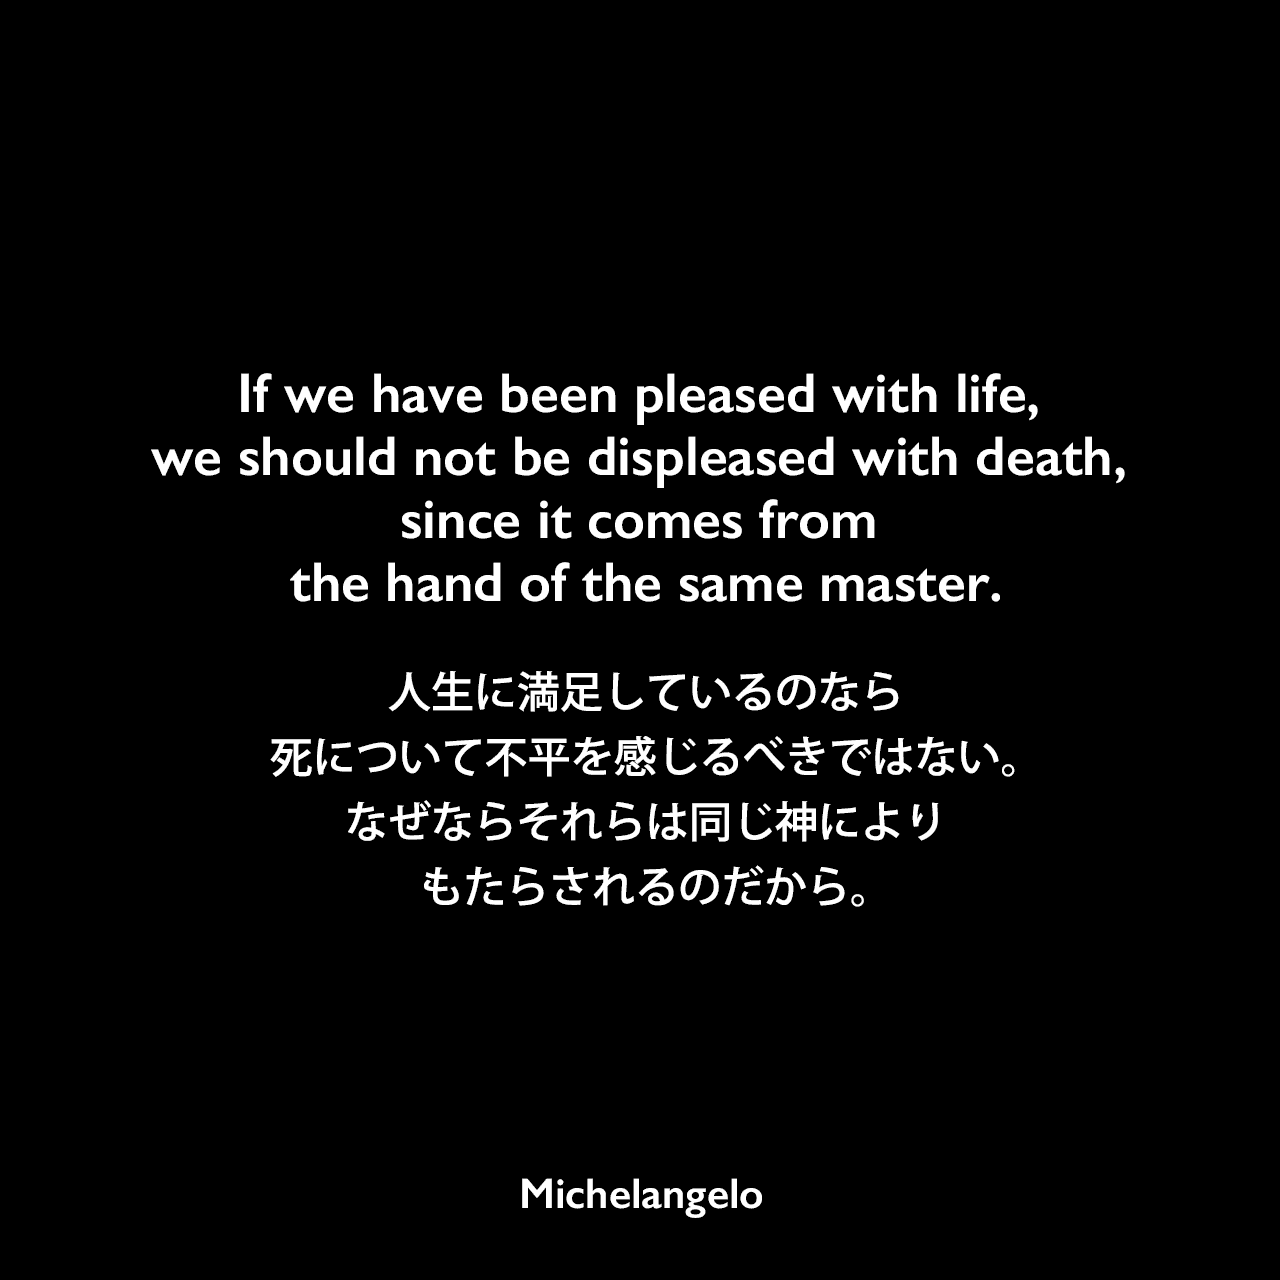 If we have been pleased with life, we should not be displeased with death, since it comes from the hand of the same master.人生に満足しているのなら、死について不平を感じるべきではない。なぜならそれらは同じ神によりもたらされるのだから。Michelangelo